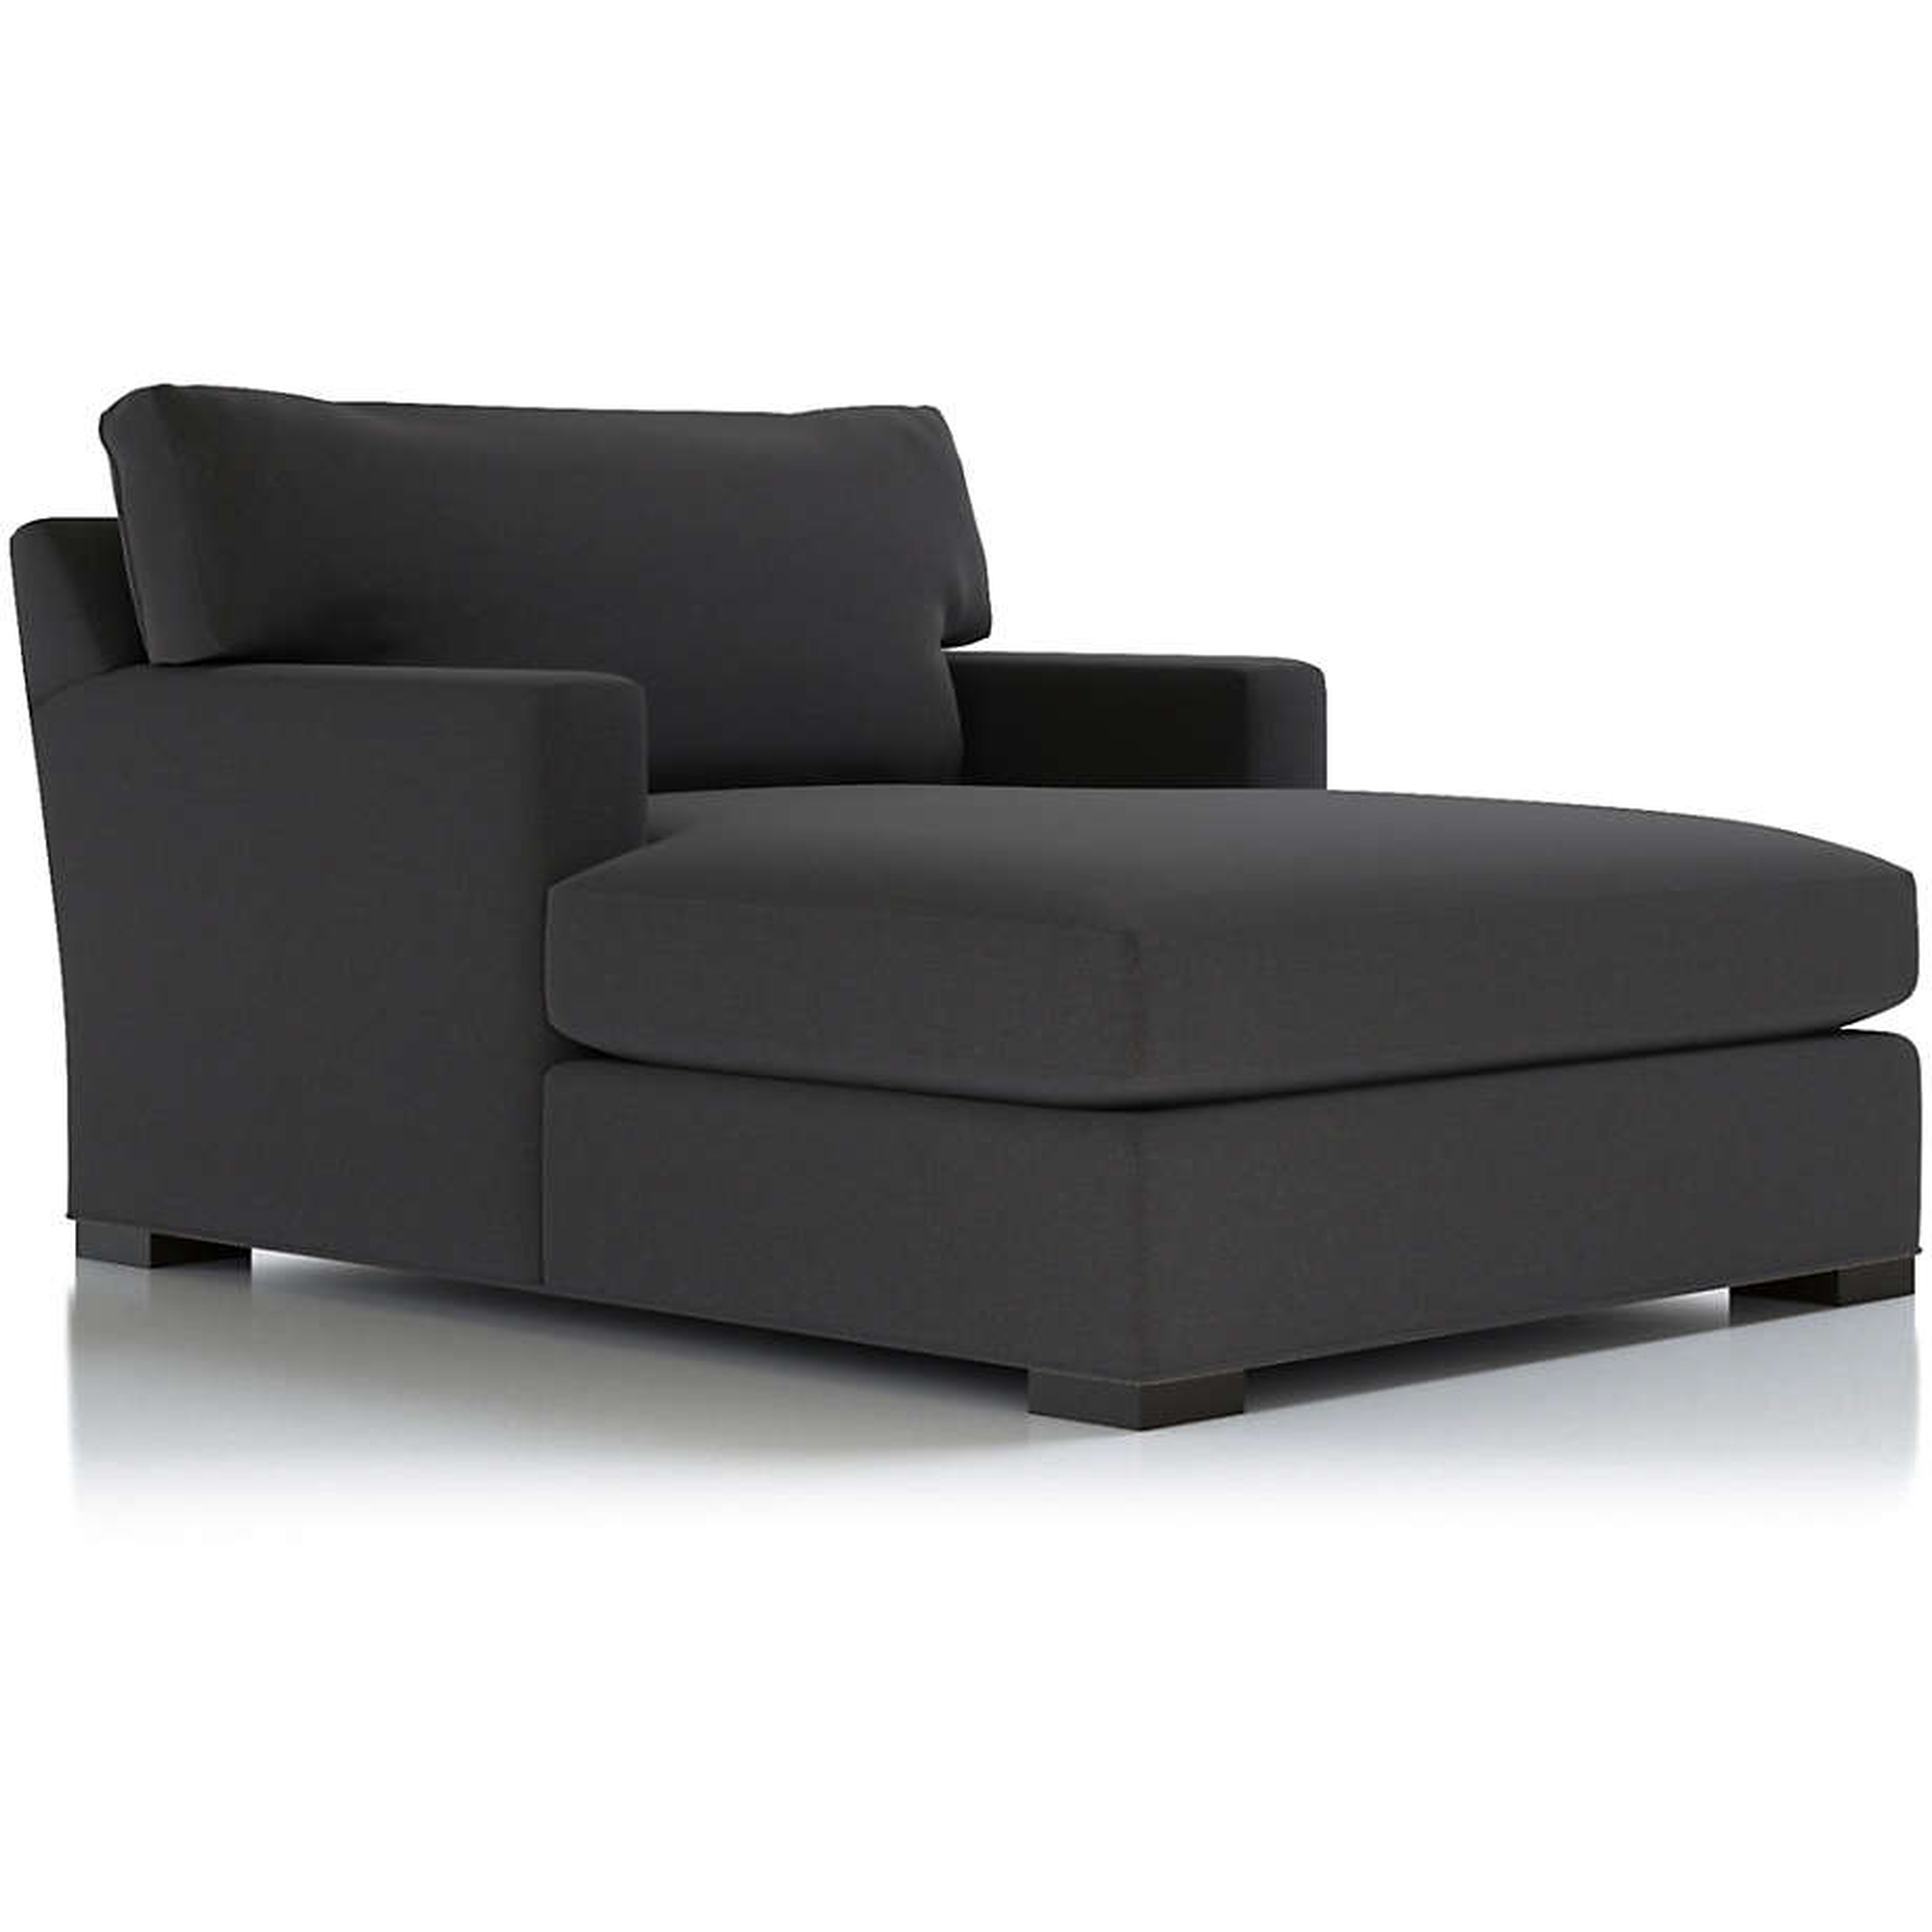 Axis II Chaise Lounge - Crate and Barrel